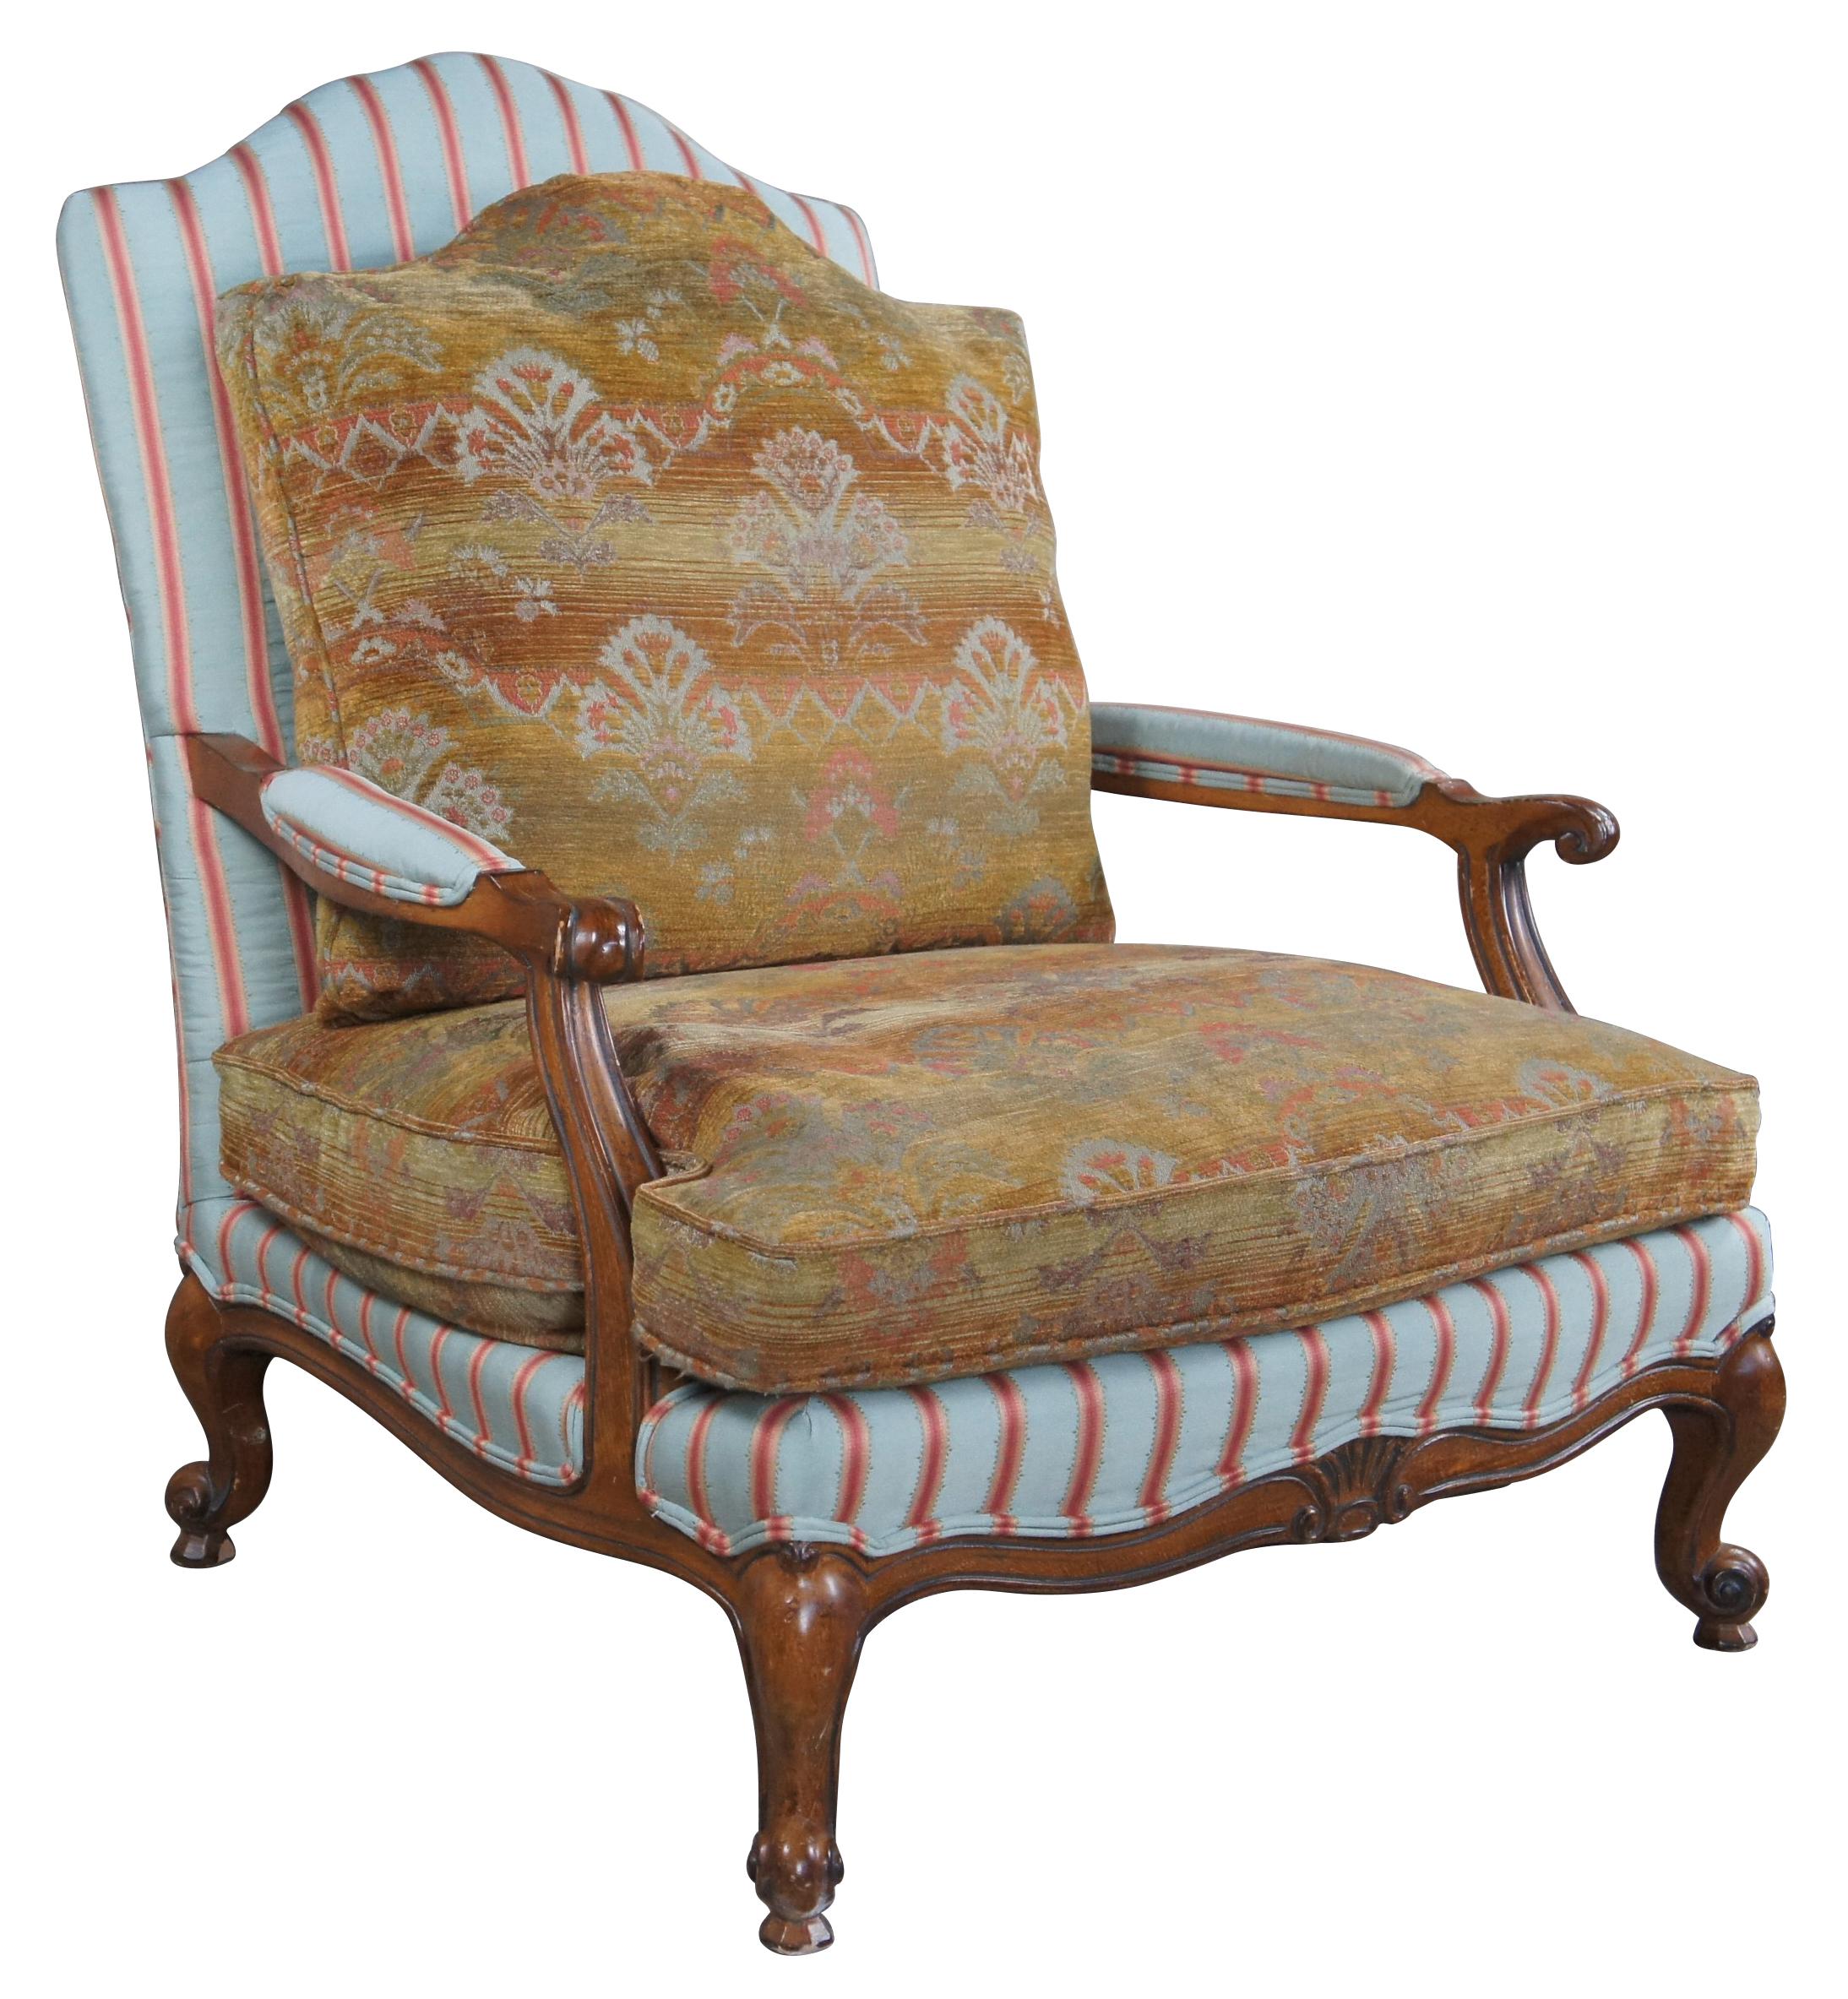 Vintage Wesley Hall oversized French Louis XV Bergere armchair. Features a serpentine oak frame with striped upholstery and southwestern cushions. The chair is supported by scrolled cabriole legs.